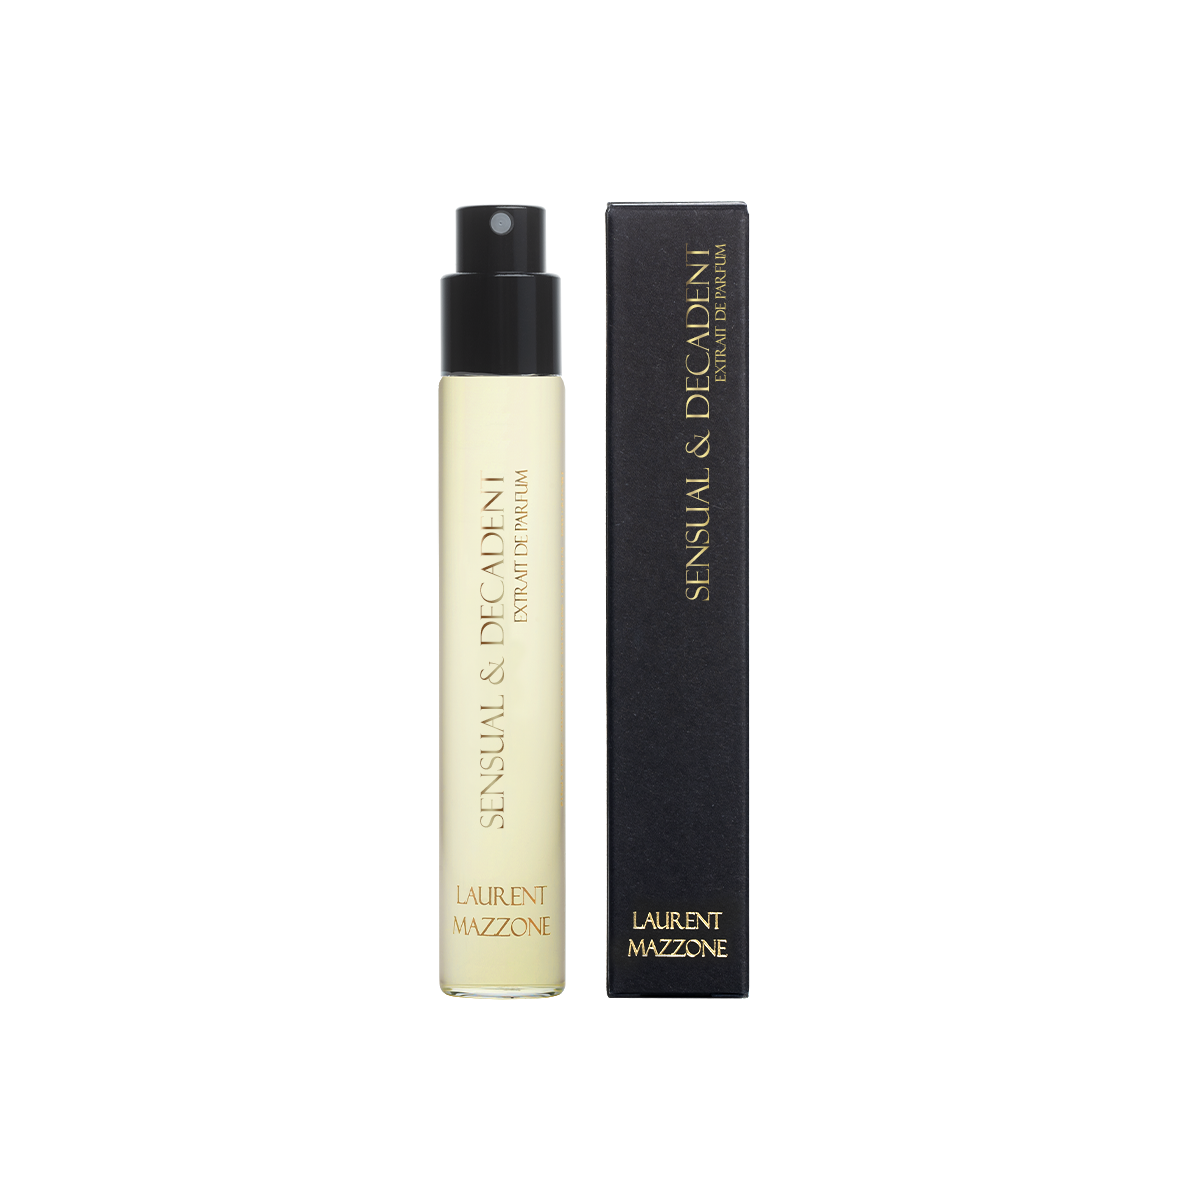 Lm sensual. LM Parfums sensual & decadent. Laurent Mazzone Chemise Blanche 15 ml. Sensual Orchid Laurent Mazzone Parfums. Sensual decadent Laurent Mazzone.